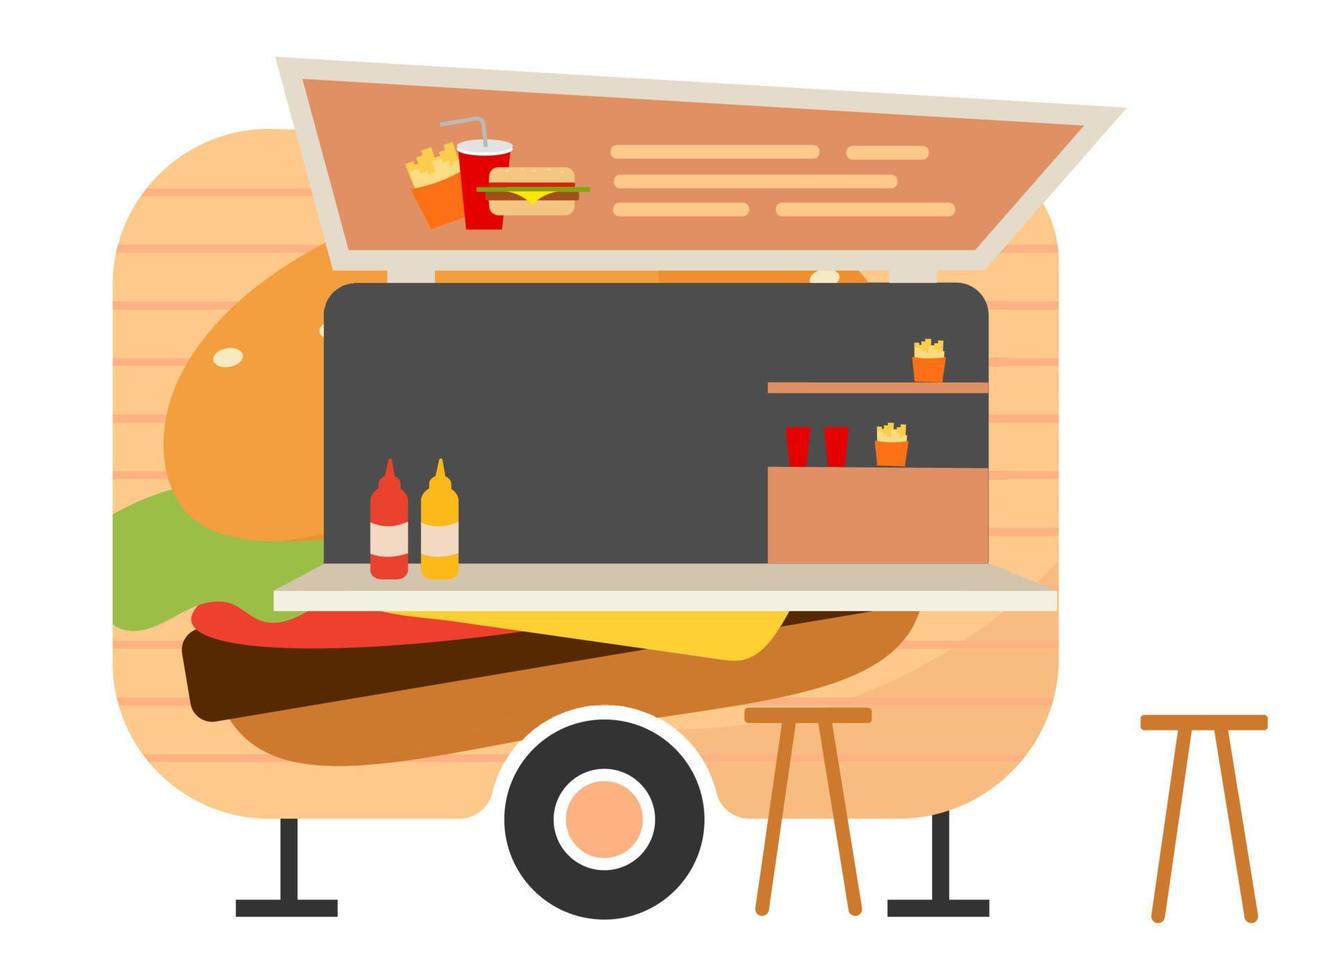 Burger food truck flat vector illustration. Street food wagon. Ready takeaway meal vehicle. Outdoor picnic. Trailer for selling hamburgers. Fast food van isolated on white background